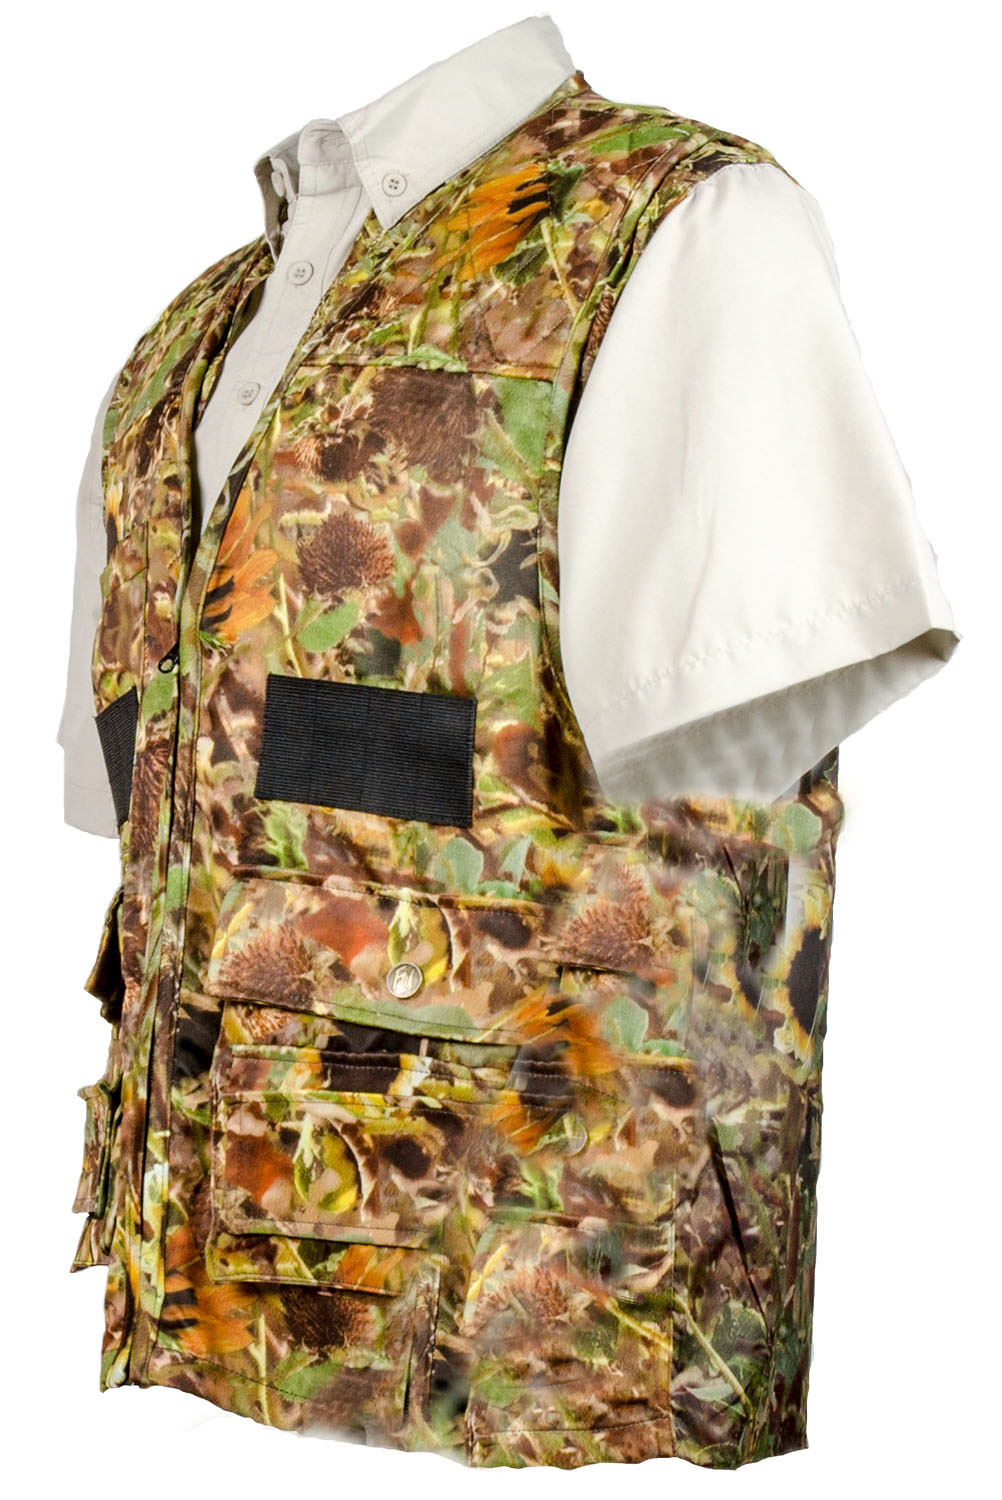 Sunflower Camo Clothing Hunting apparel mossy oak Realtree